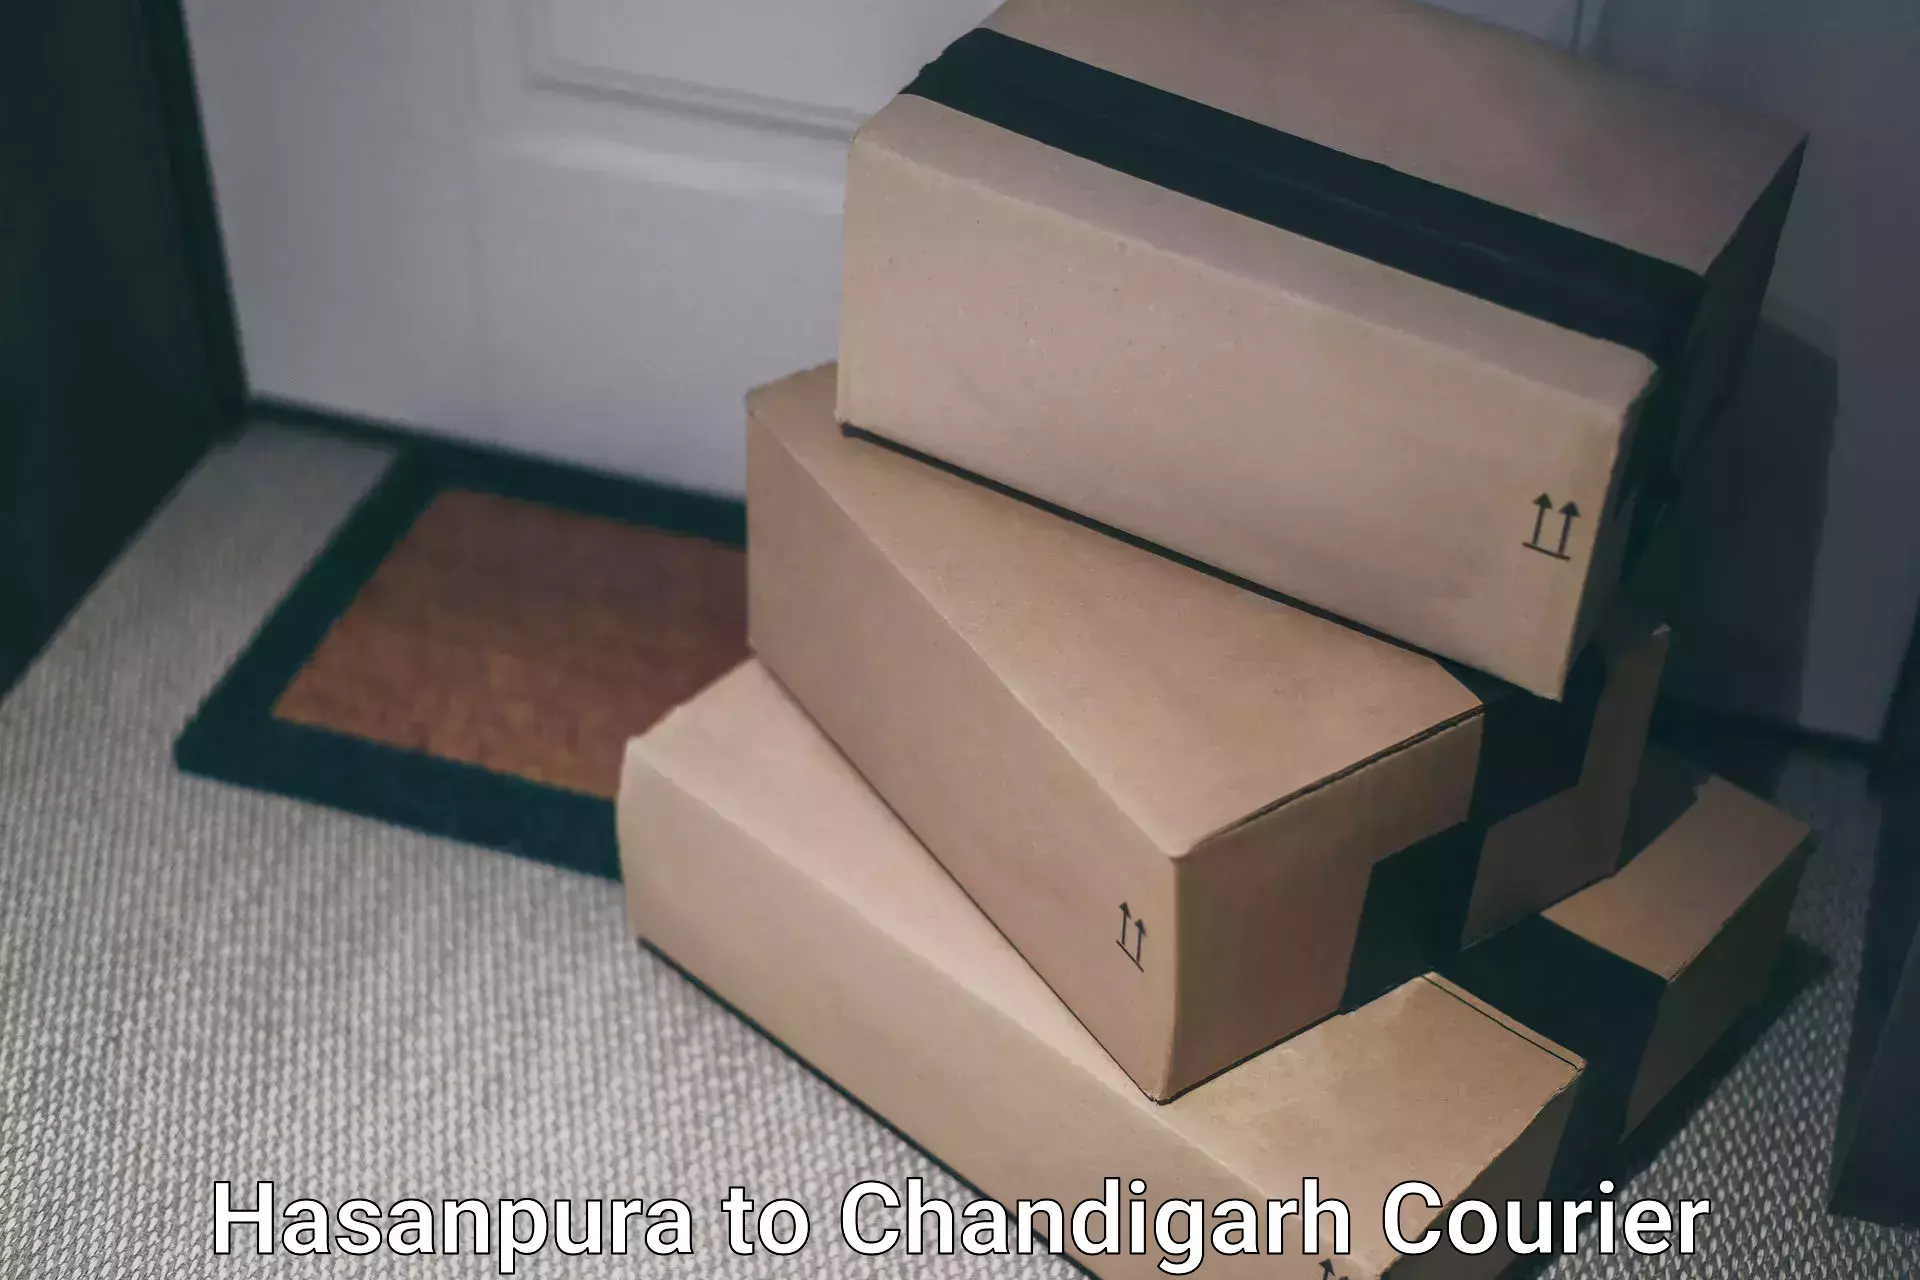 Next-day delivery options Hasanpura to Chandigarh